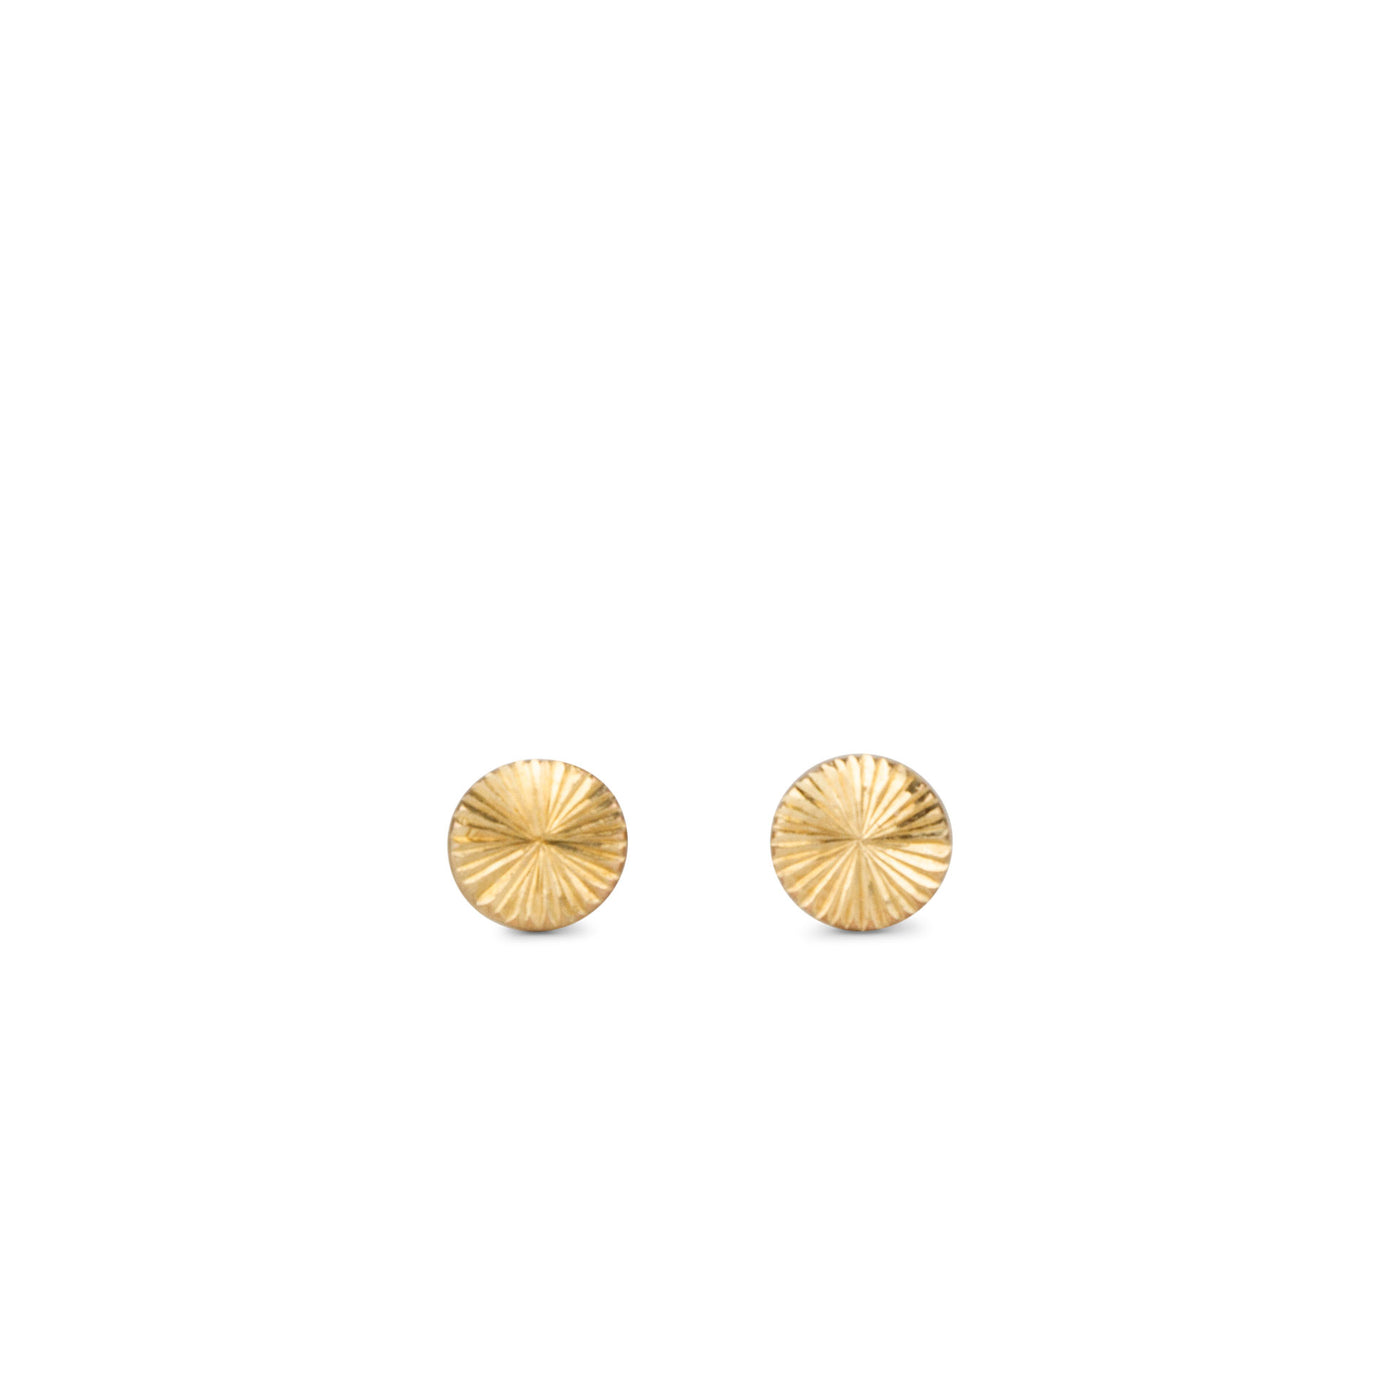 Tiny engraved gold stud earring by Corey Egan on a white background